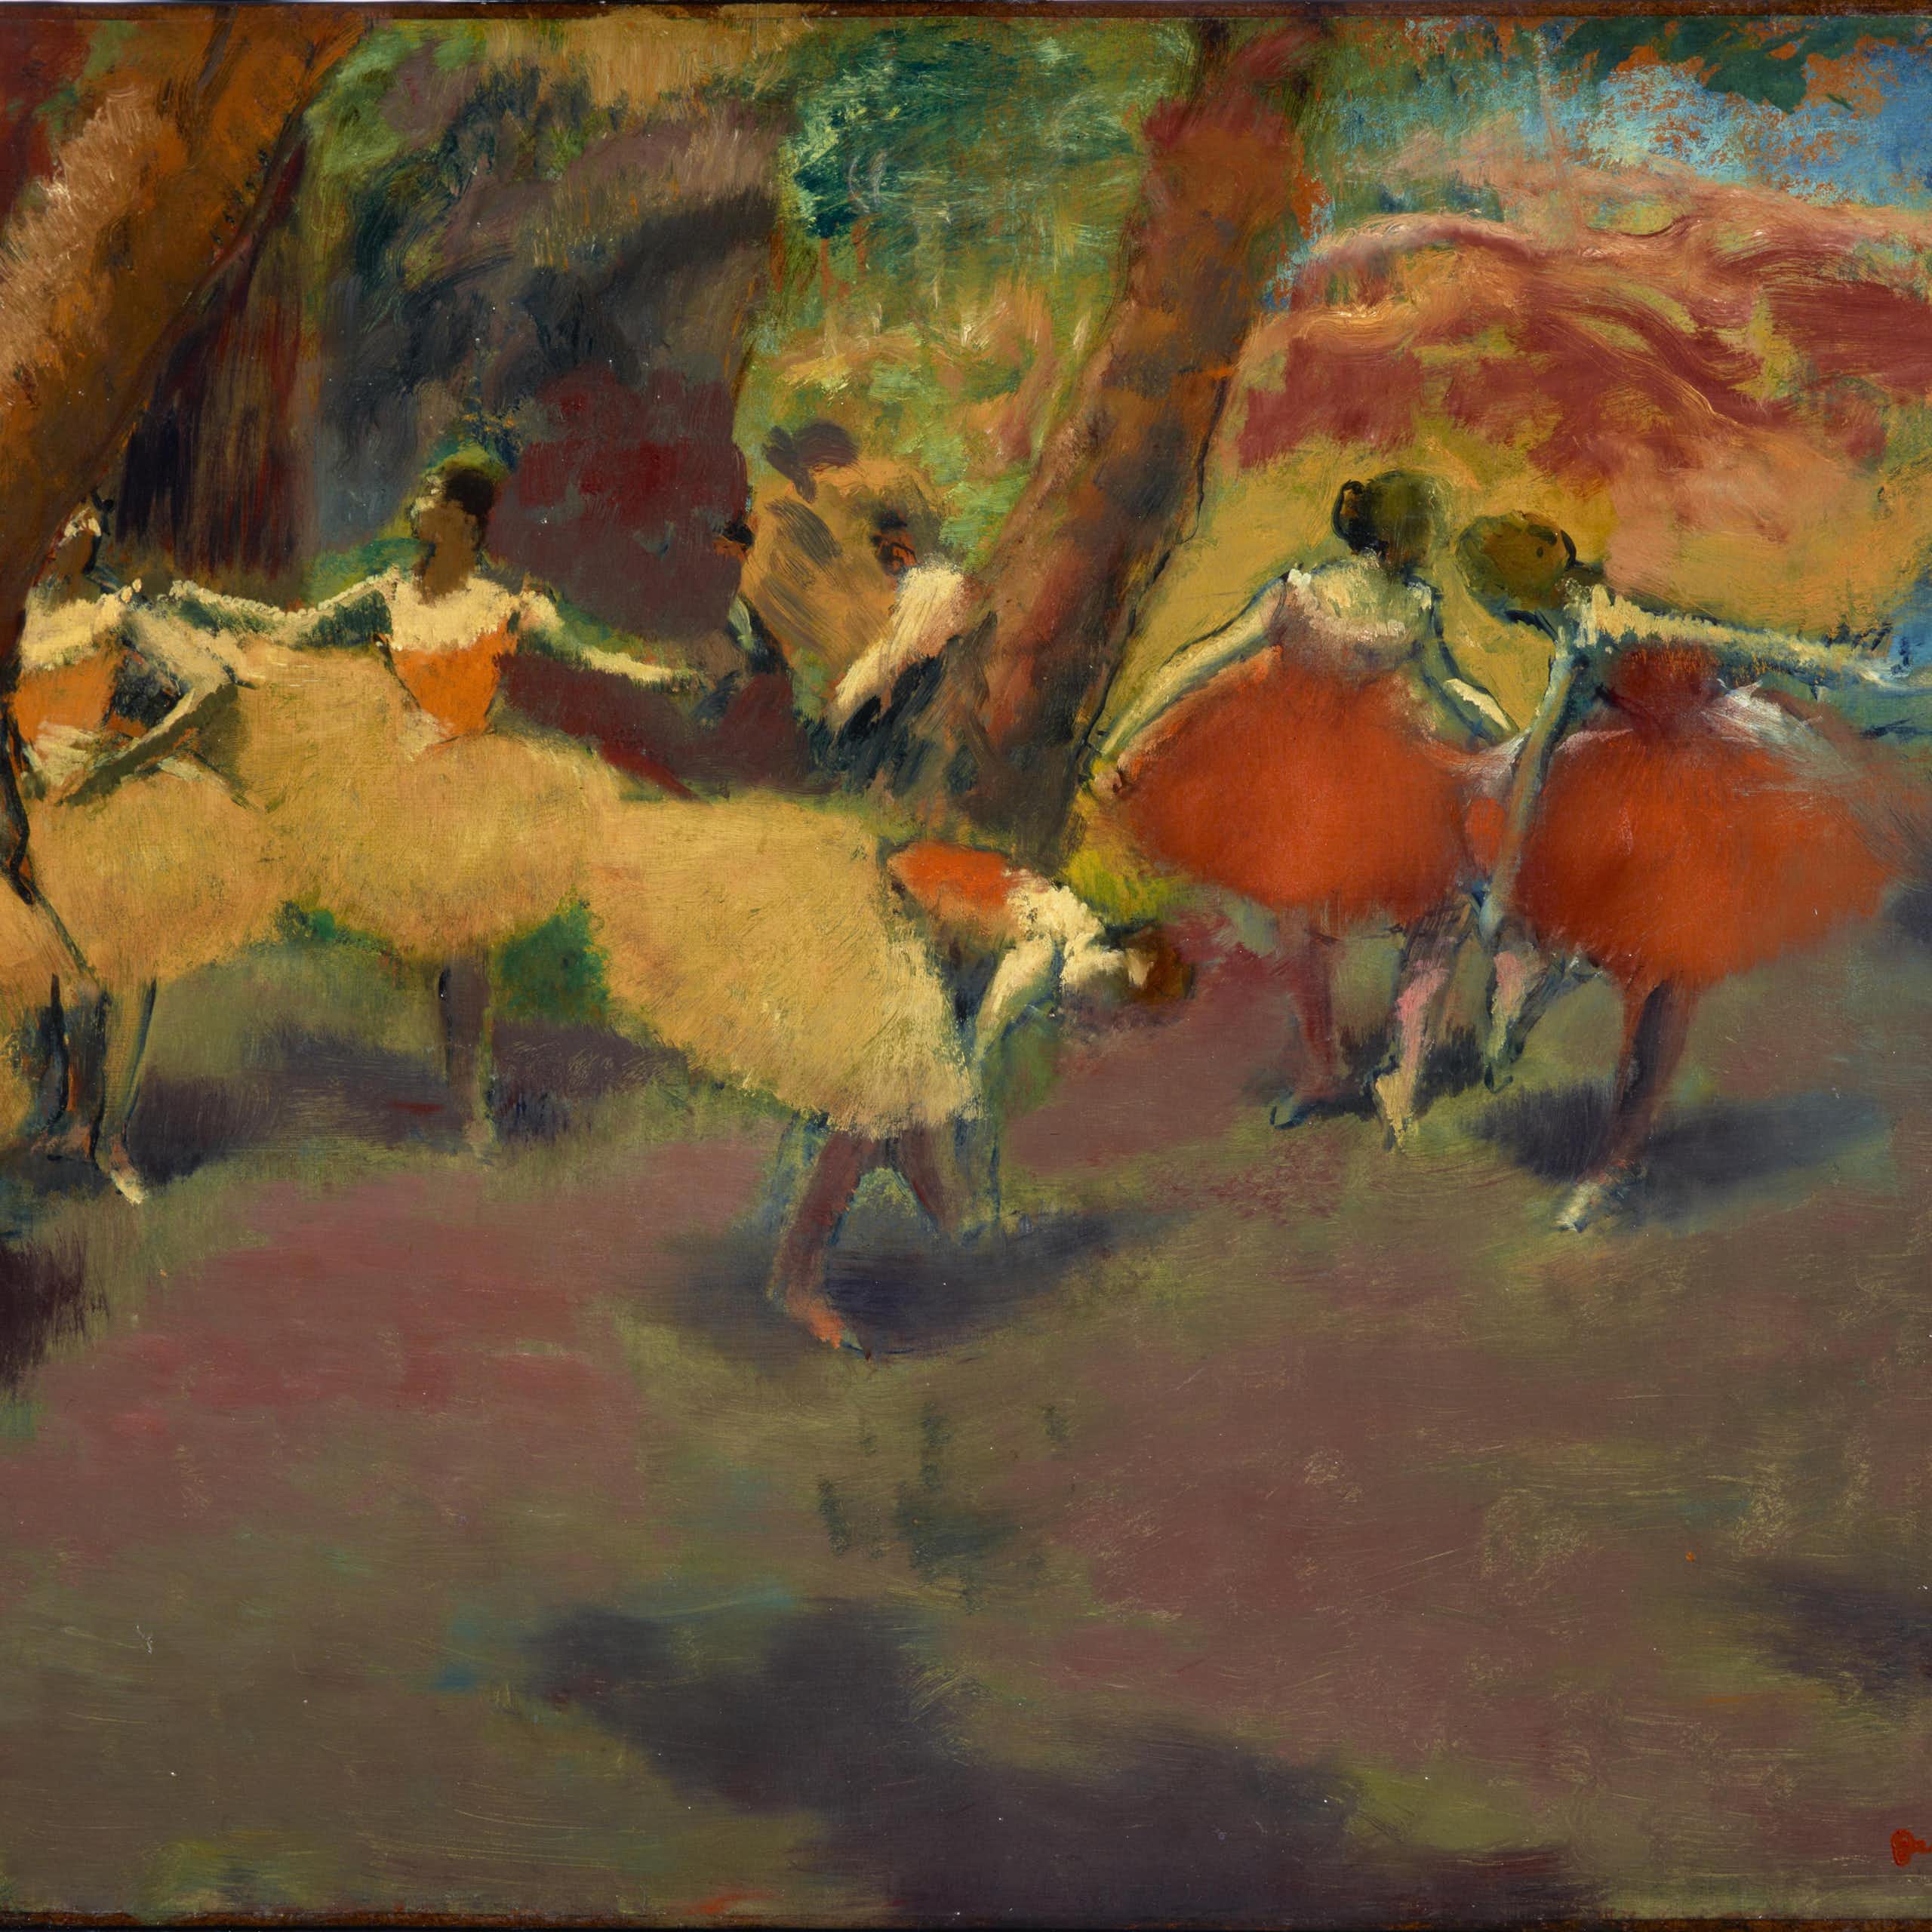 An Impressionist painting by Edgar Degas showing ballet dancers backstage.